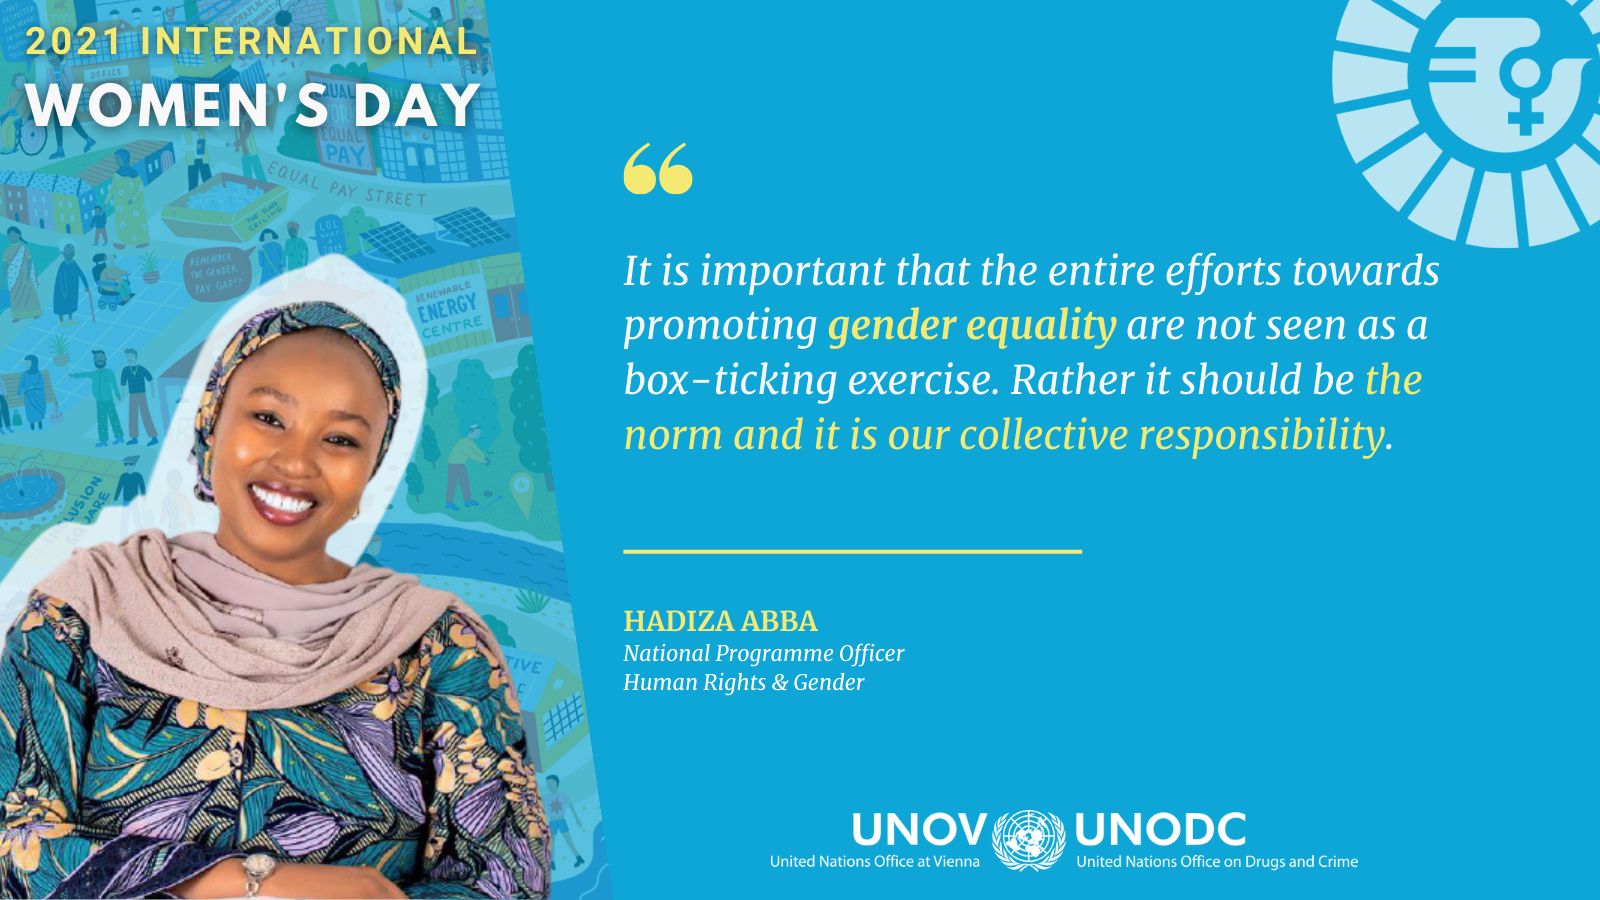 Women leading the way towards gender equality within UNOV/UNODC